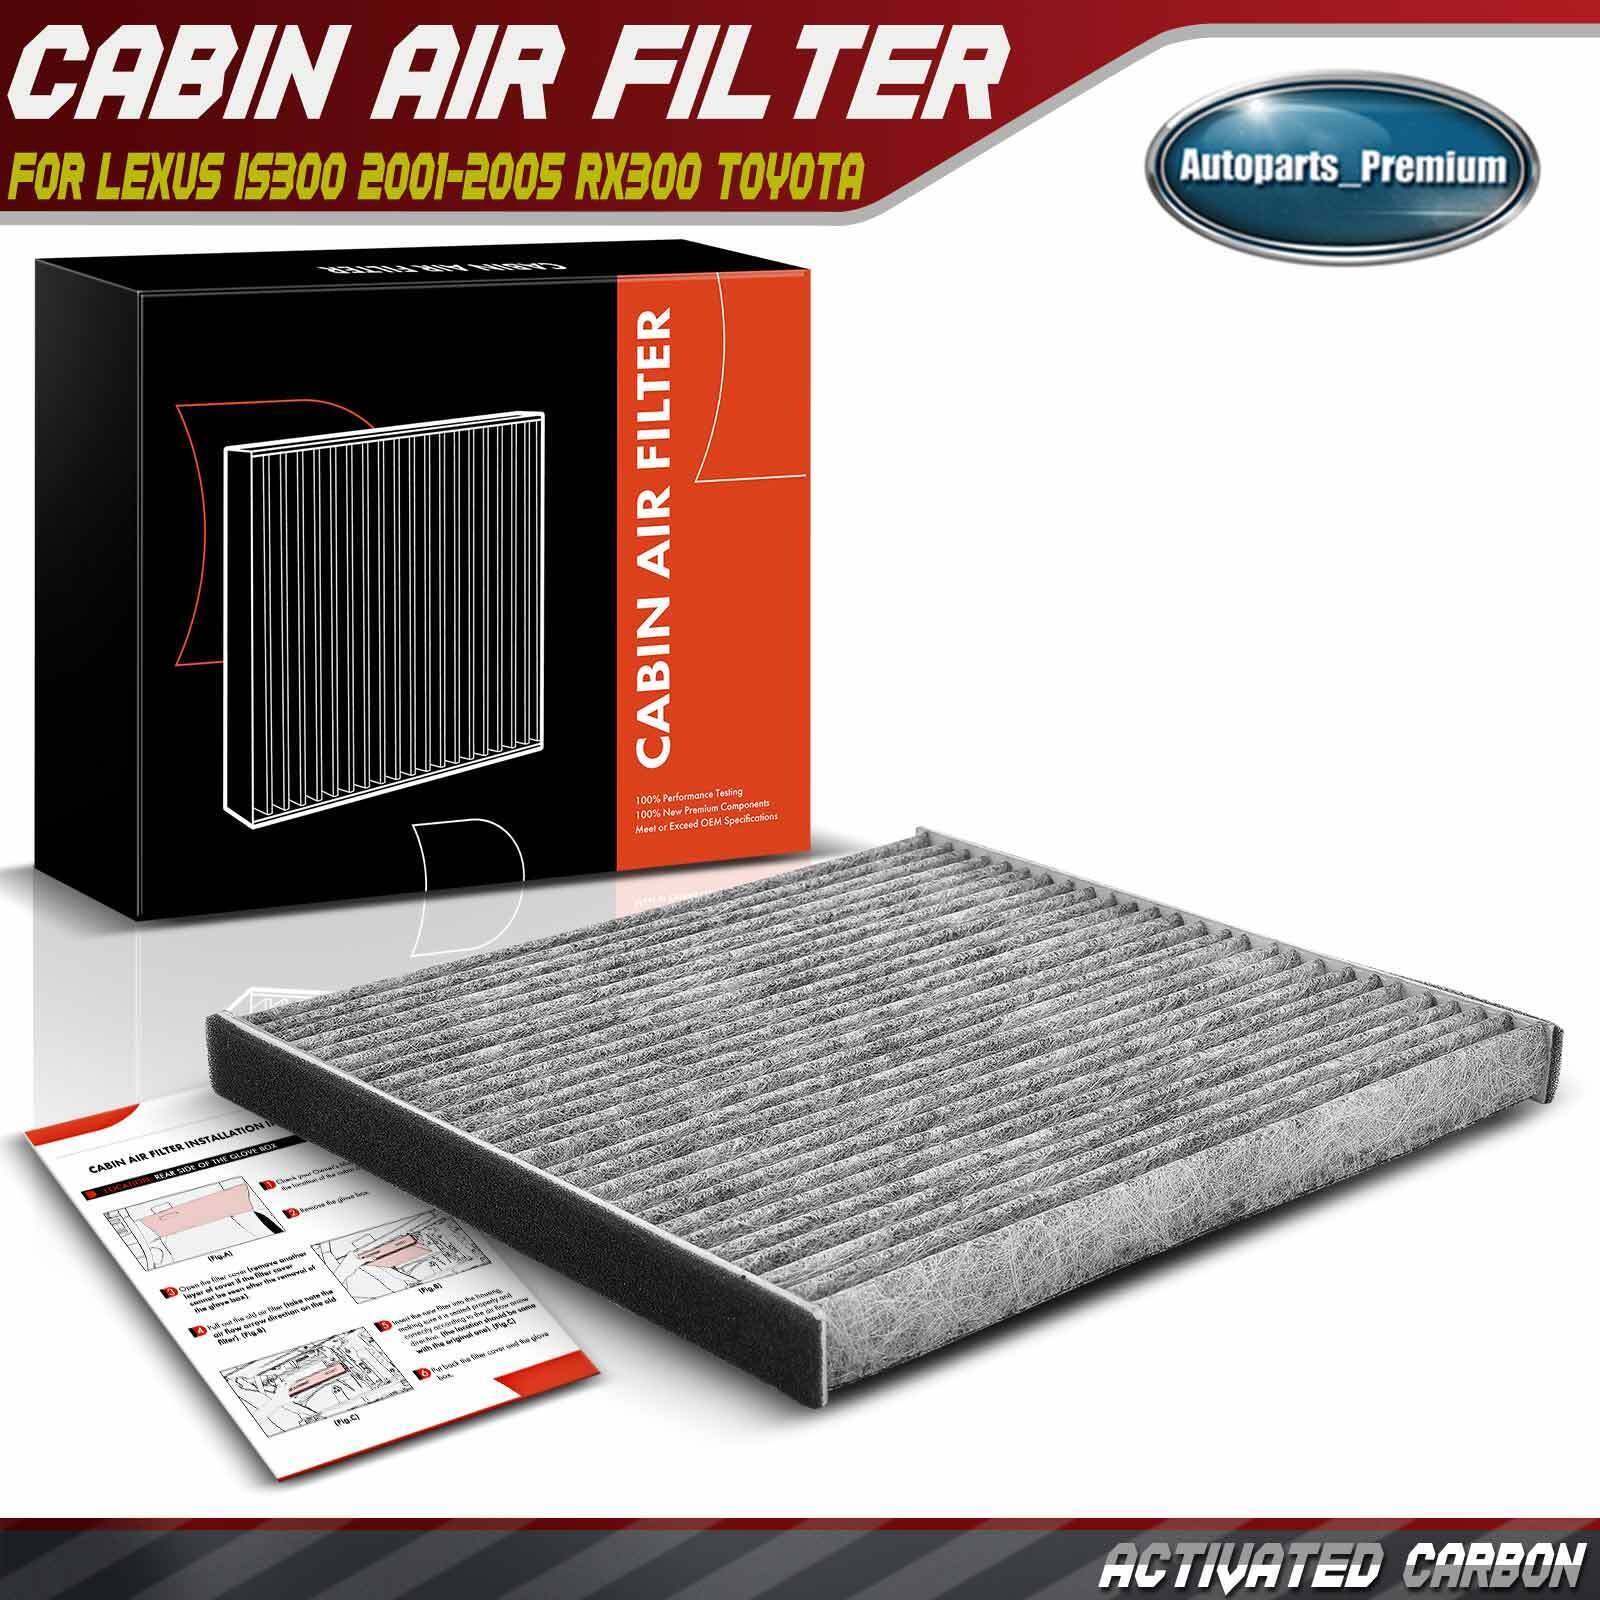 Activated Carbon Cabin Air Filter for Lexus IS300 RX300 99-03 Toyota Highlander